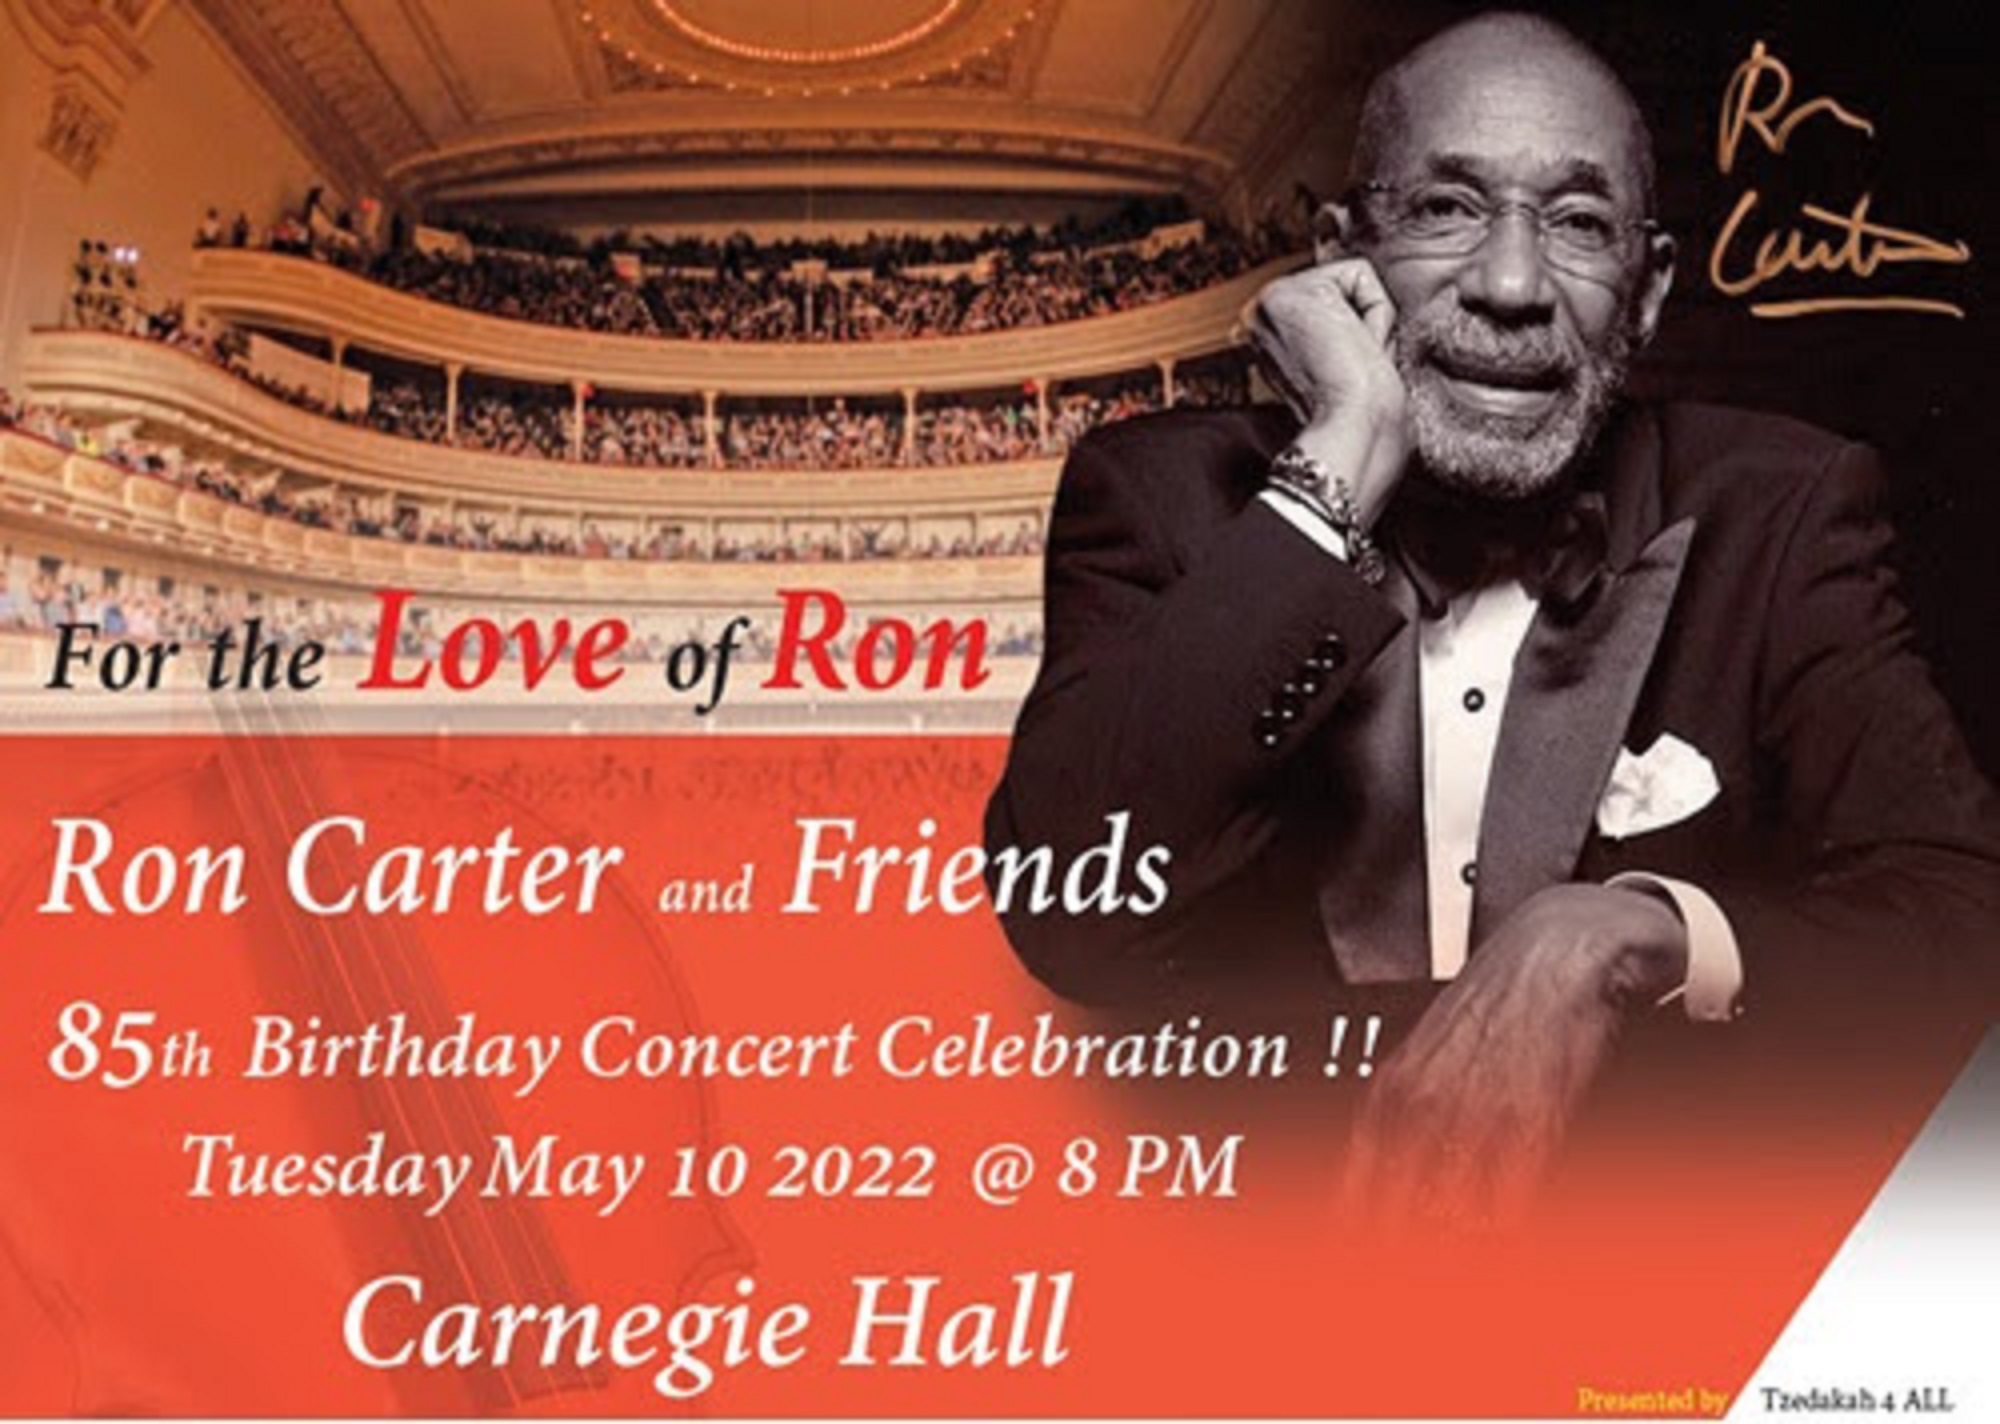 Ron Carter and Friends: 85th Birthday Concert Celebration Tuesday, May 10, 2022 8 PM Carnegie Hall